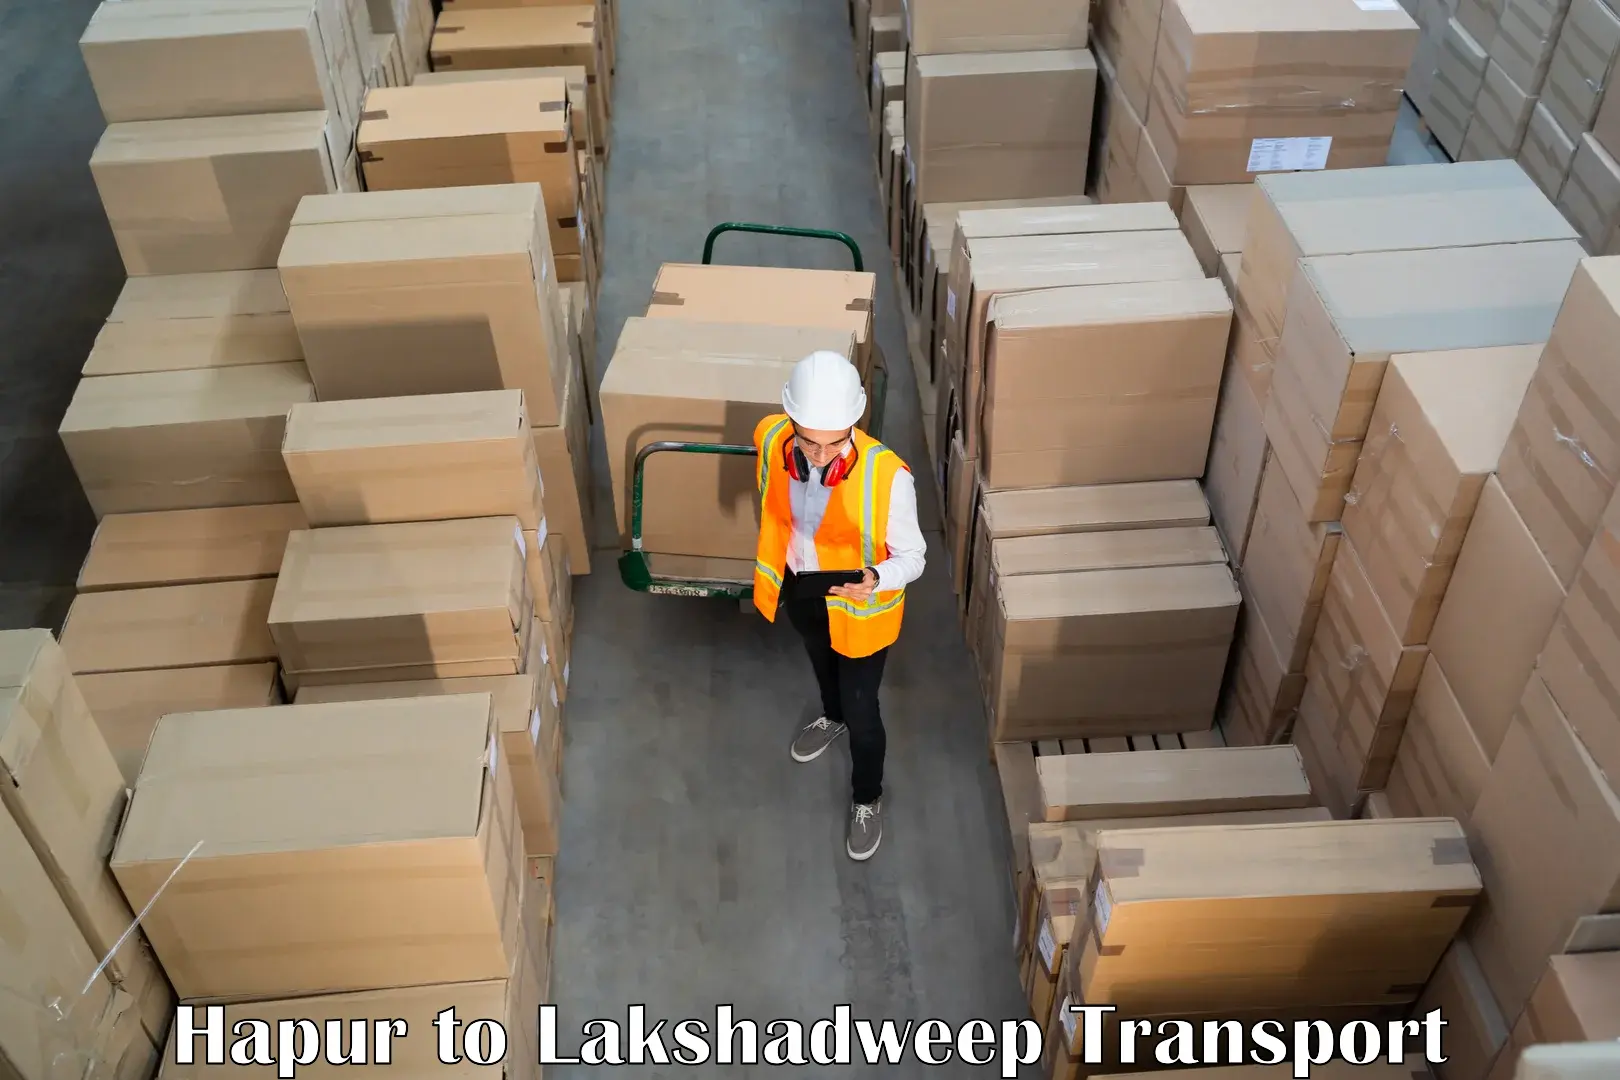 Container transport service Hapur to Lakshadweep